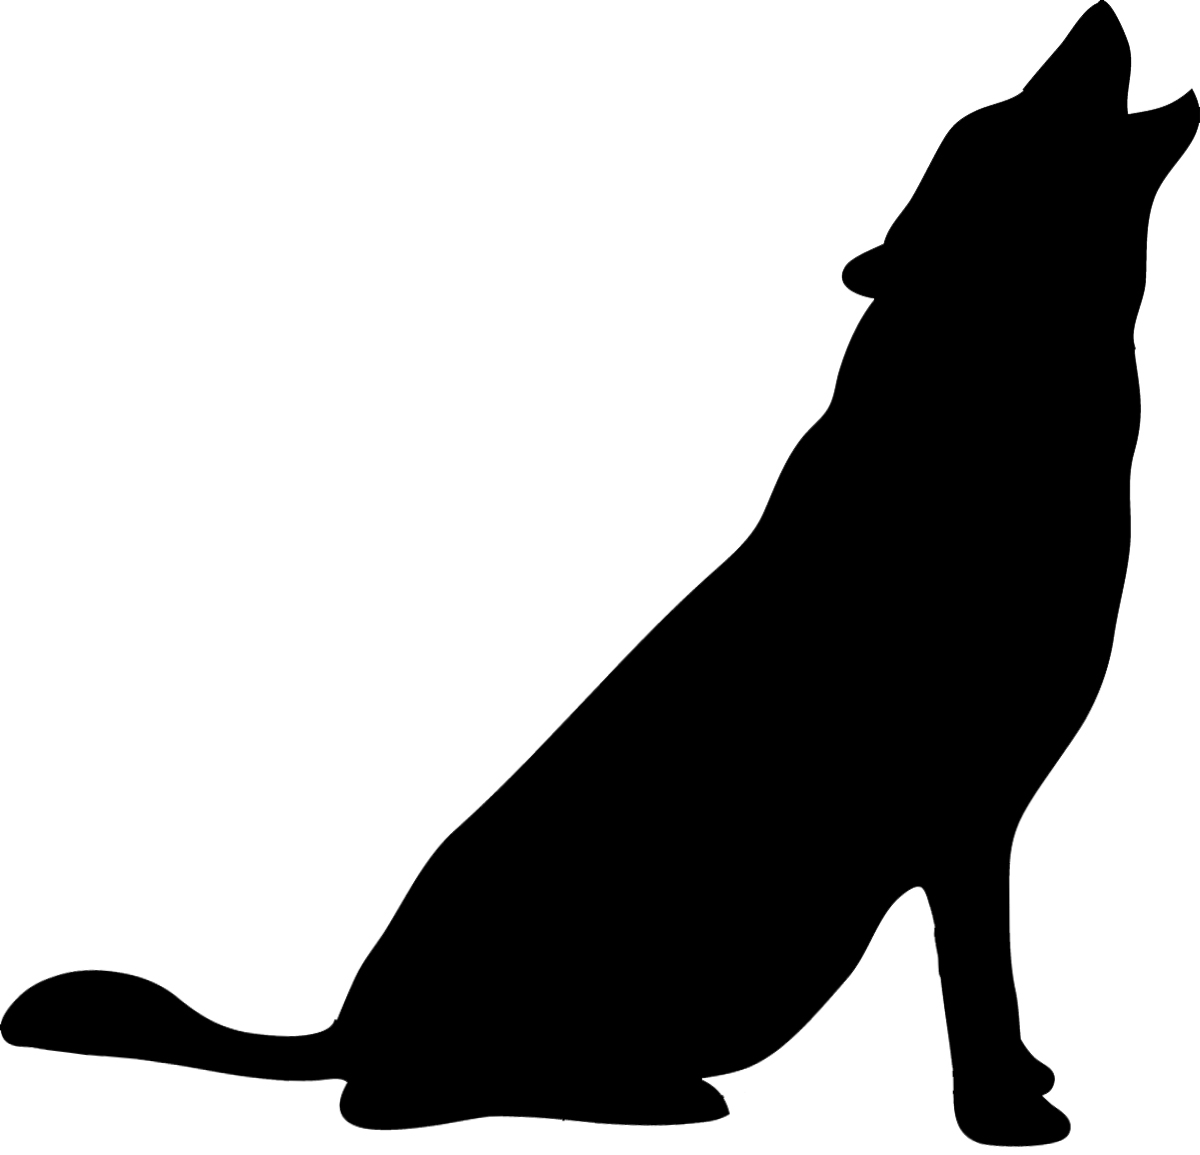 Free Animal Silhouettes, Download Free Animal Silhouettes png images